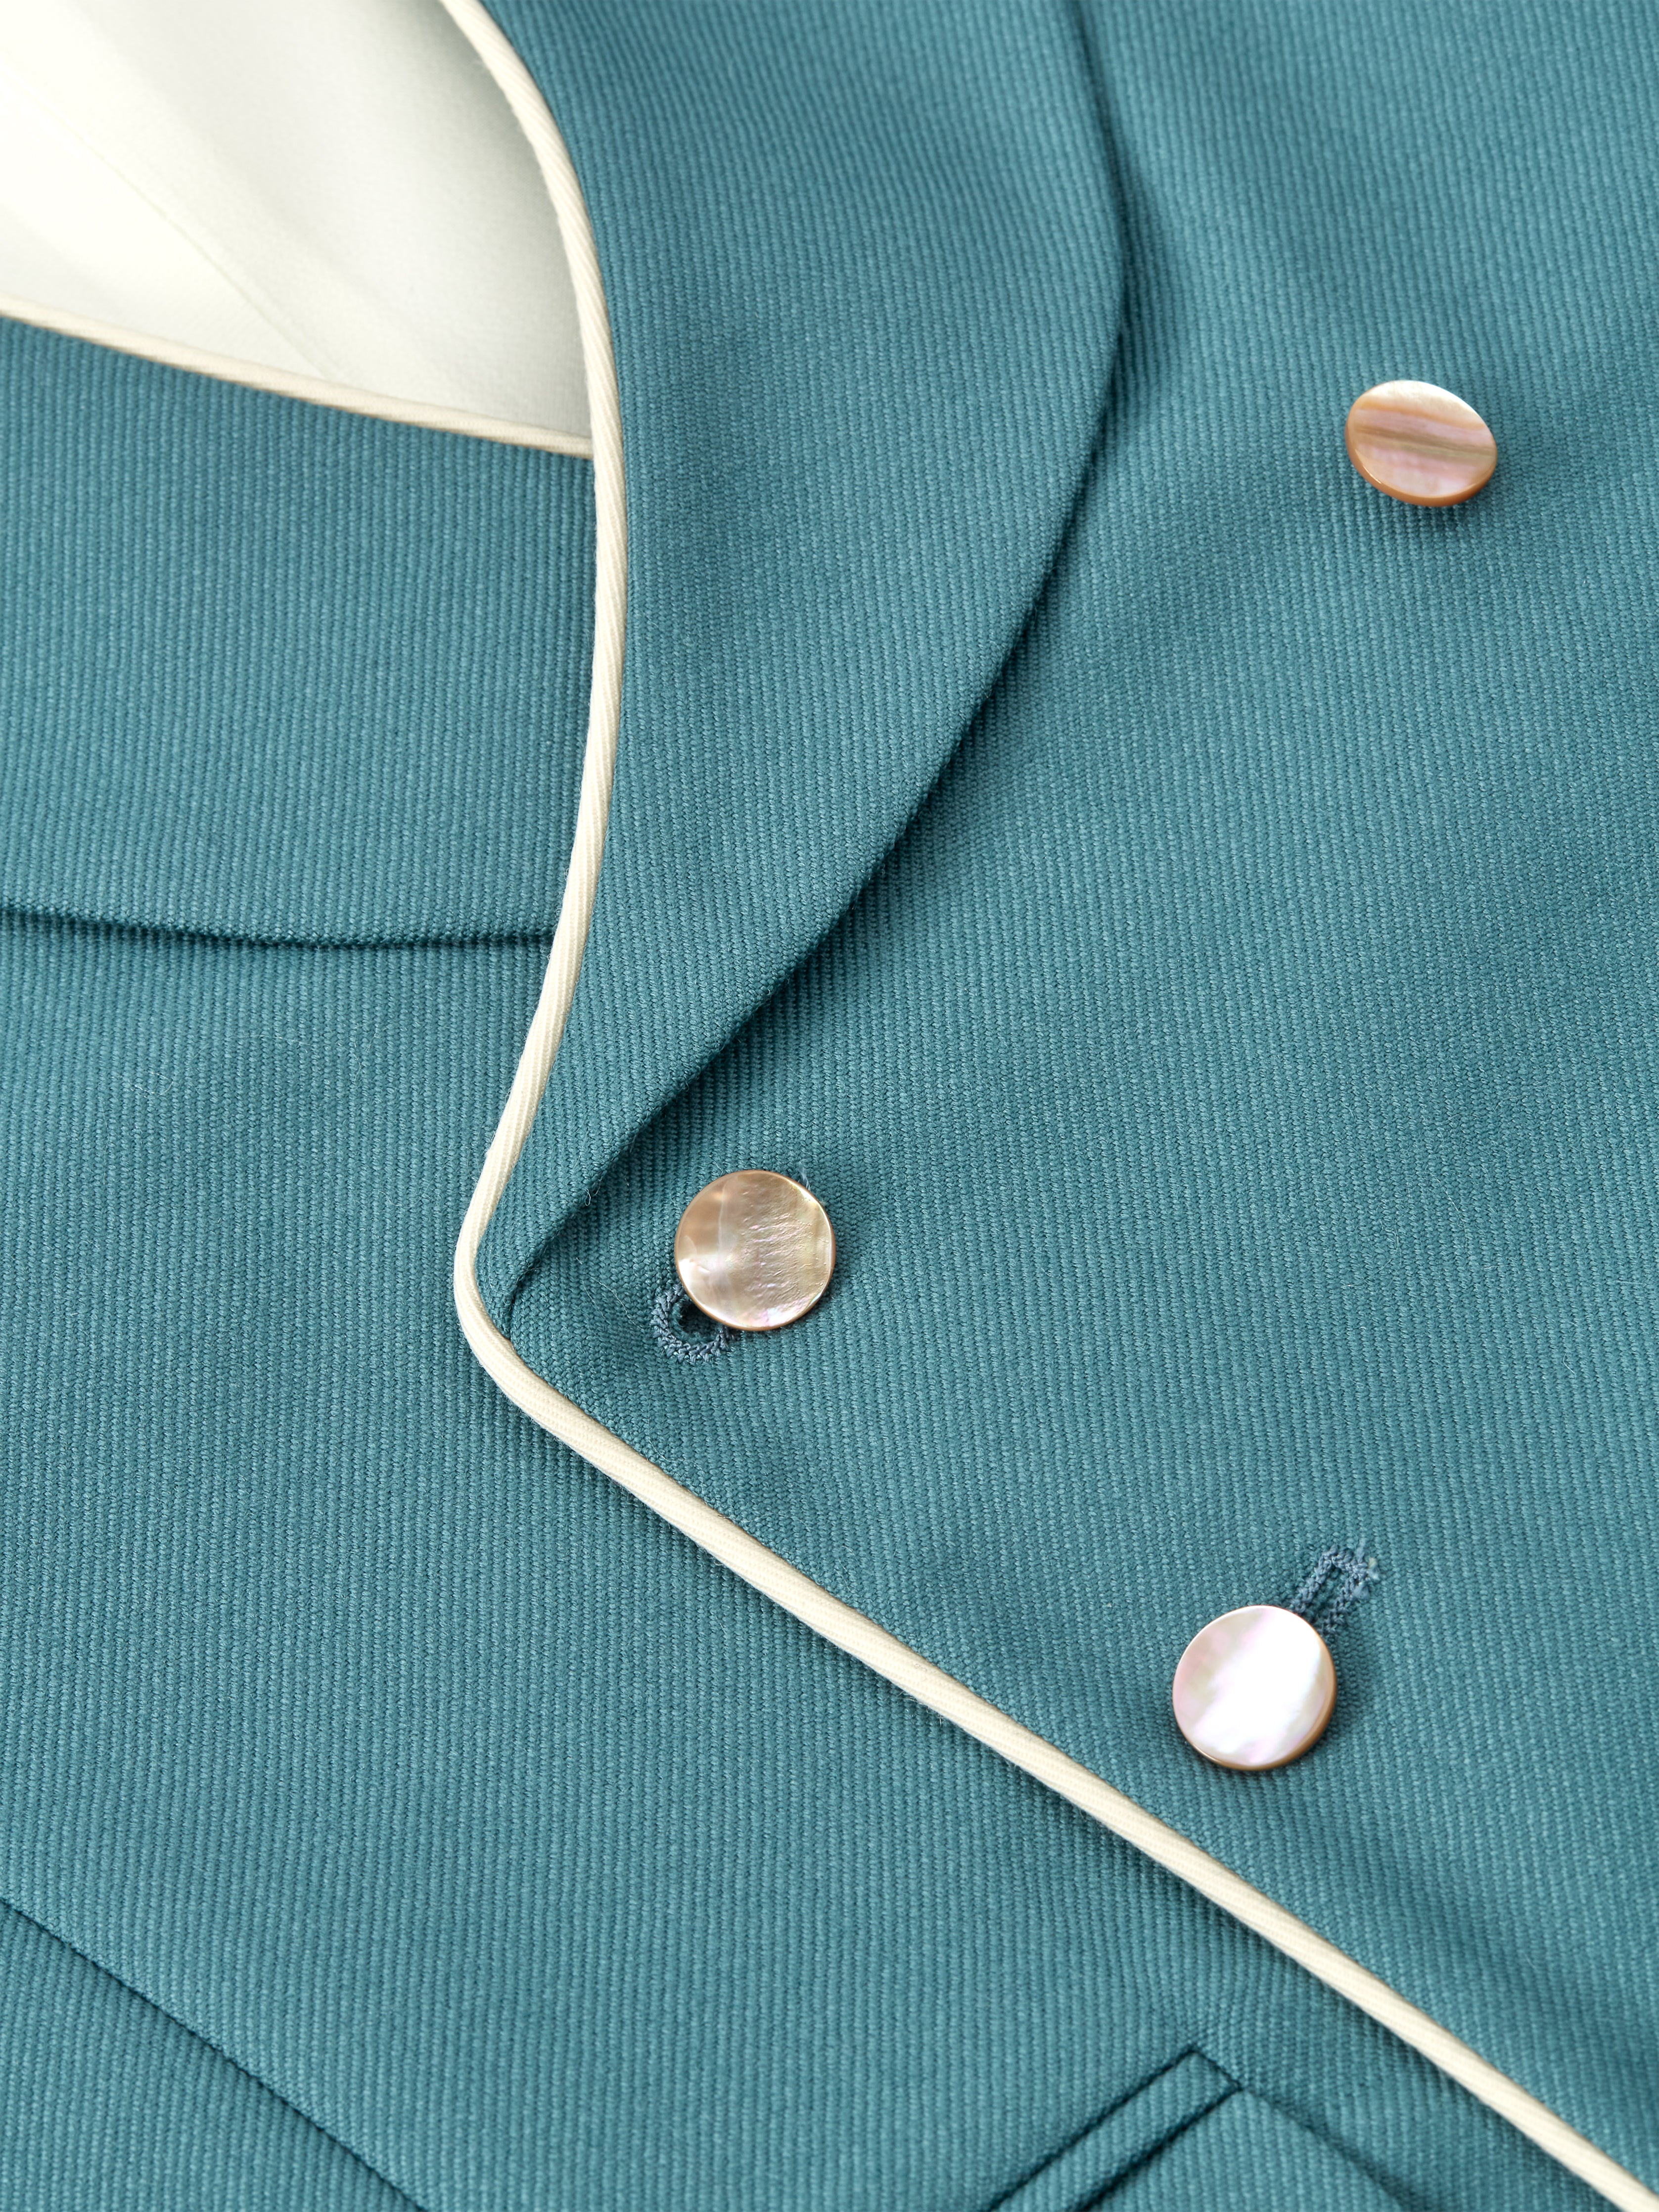 Sea Green Wool Double Breasted 8 Button Shawl Lapel Piped Waistcoat